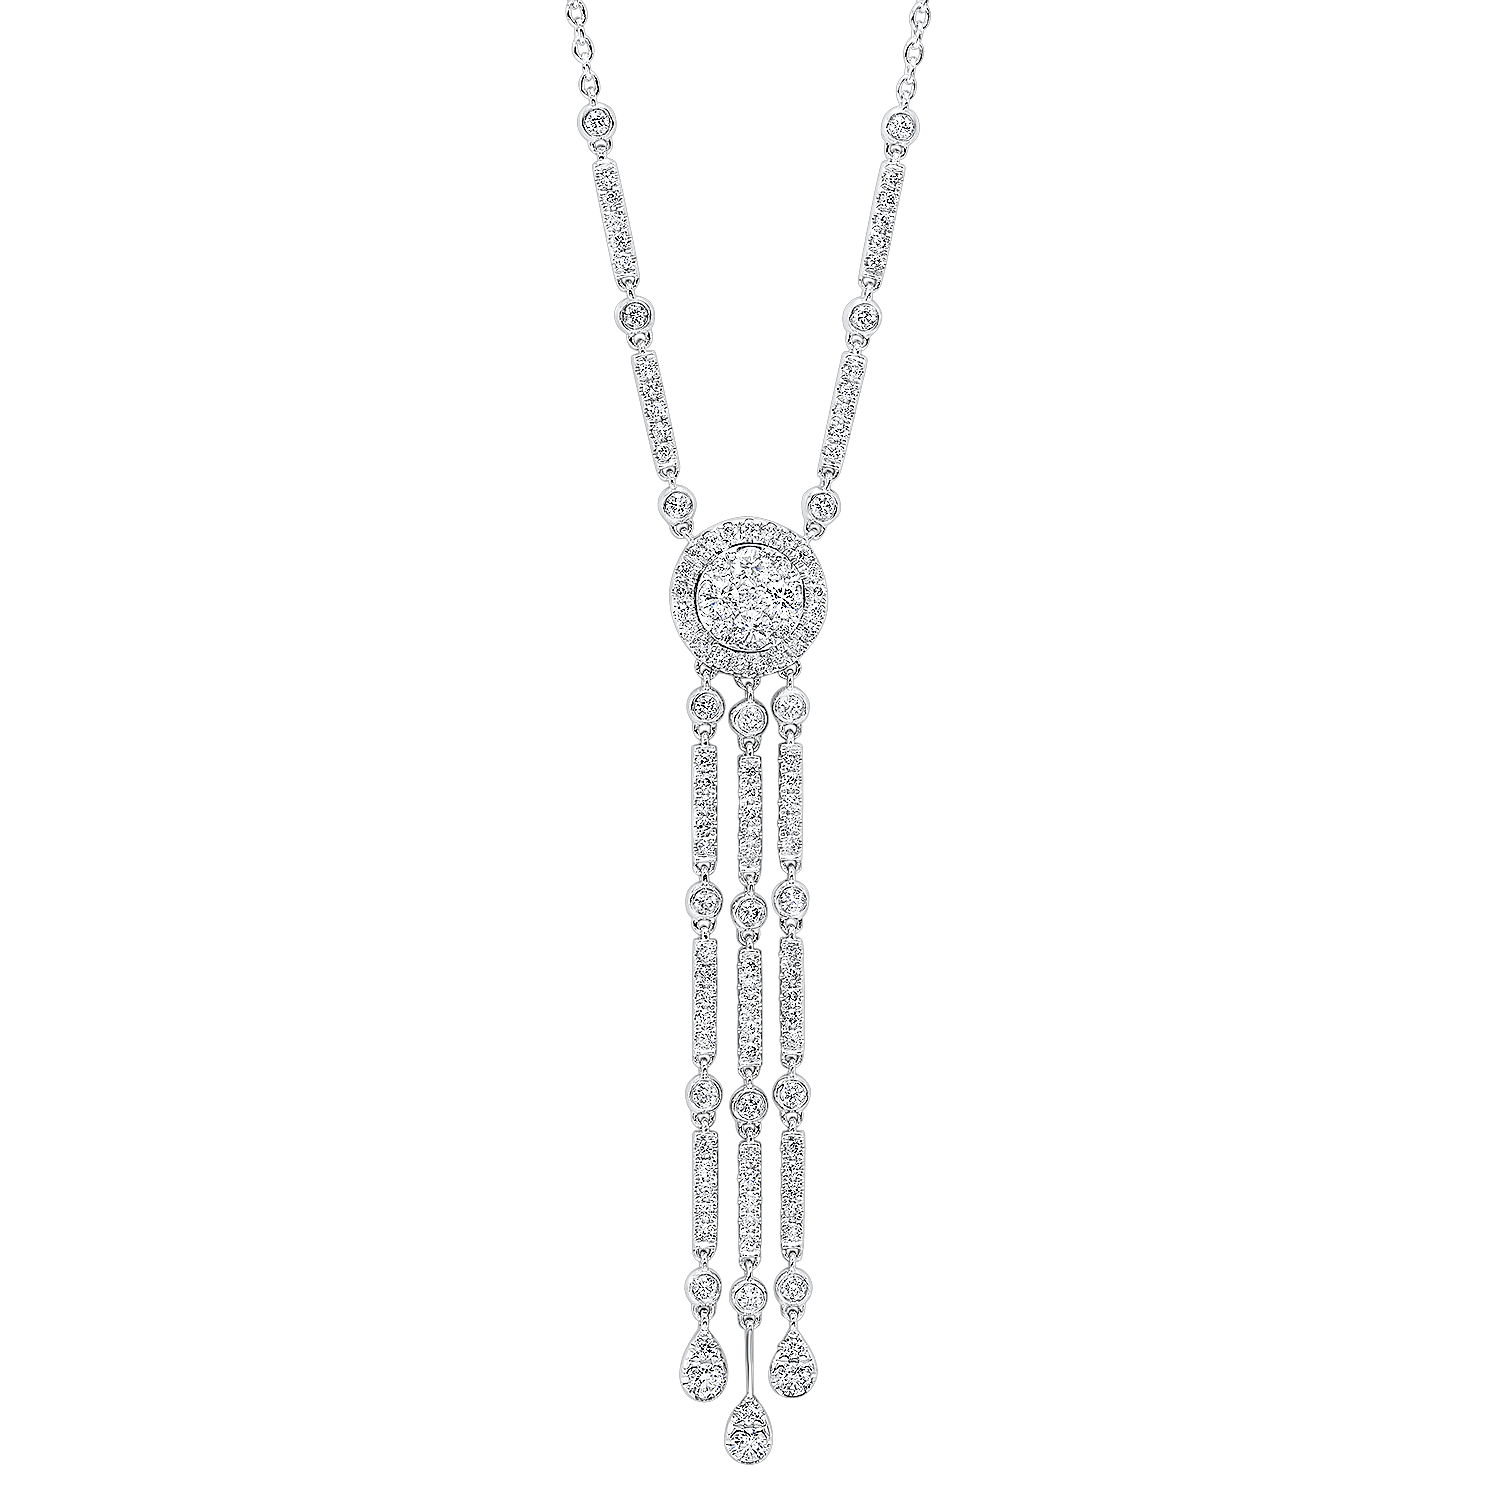 BW James Jewelers Necklace 16 Page Christmas Catalog Offer 14K Diamond Necklace 5/8 ctw